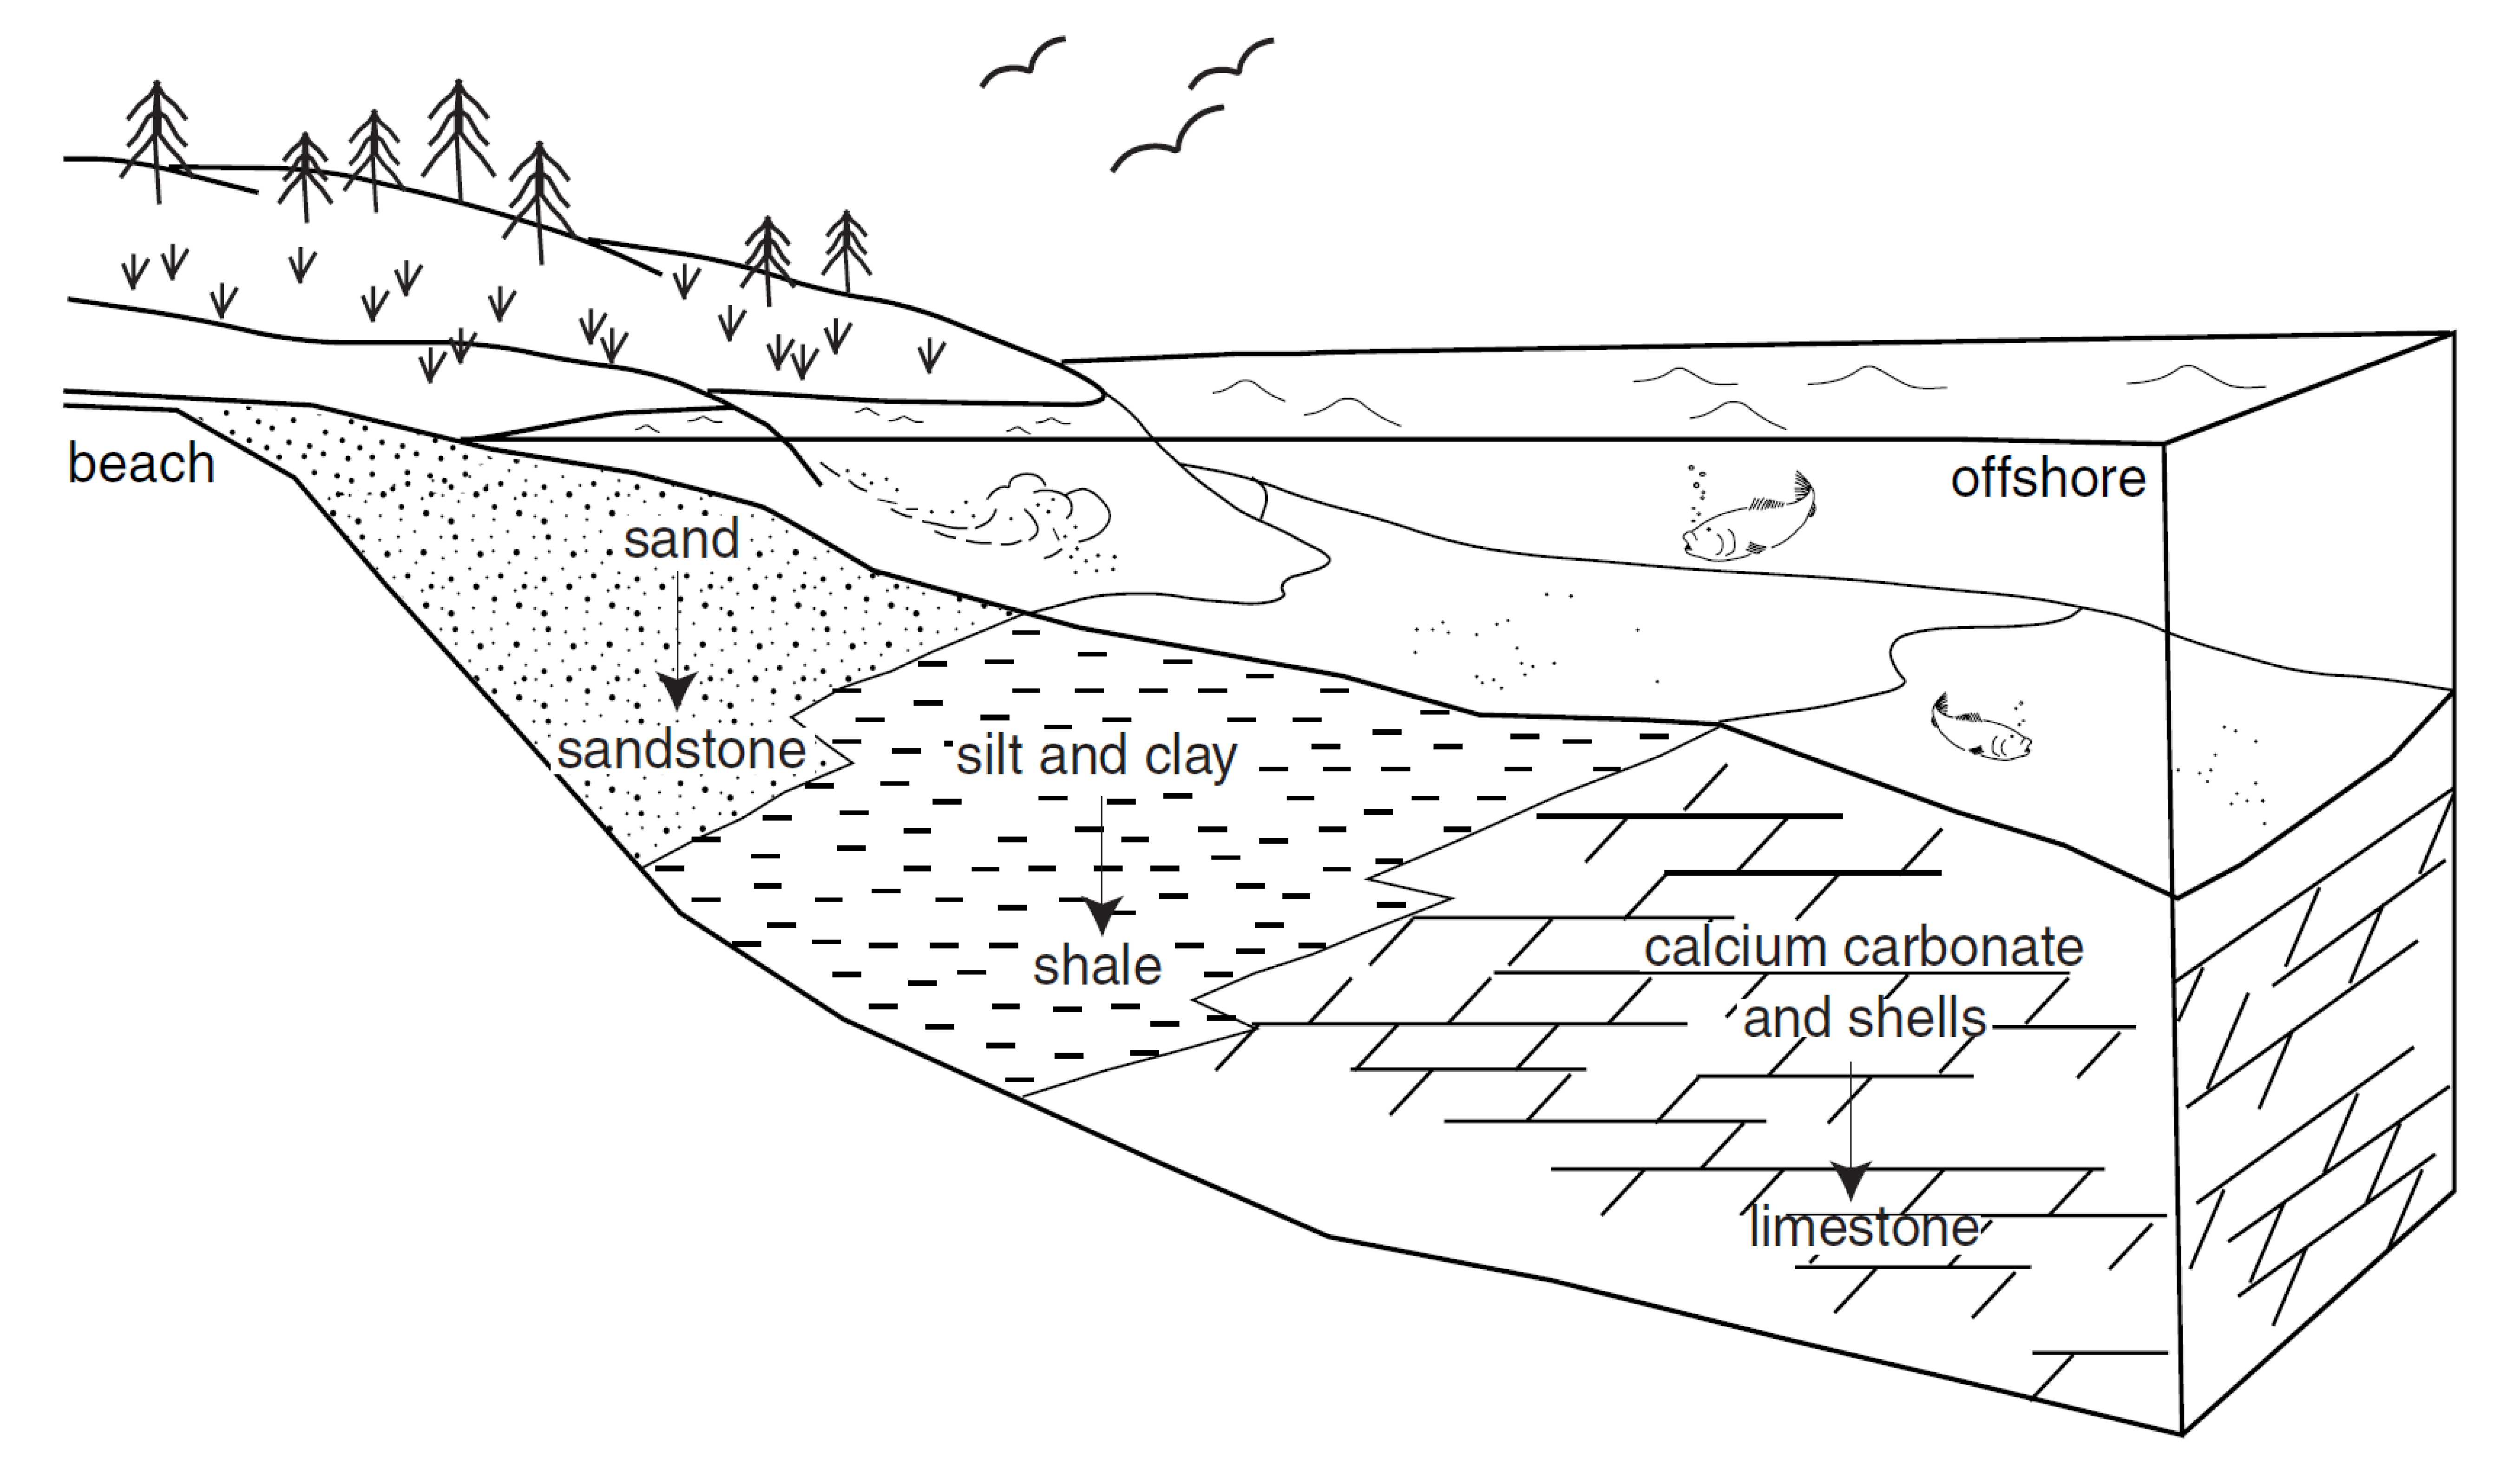 Cross-sectional view of the ocean from the shoreline to quieter water offshore.